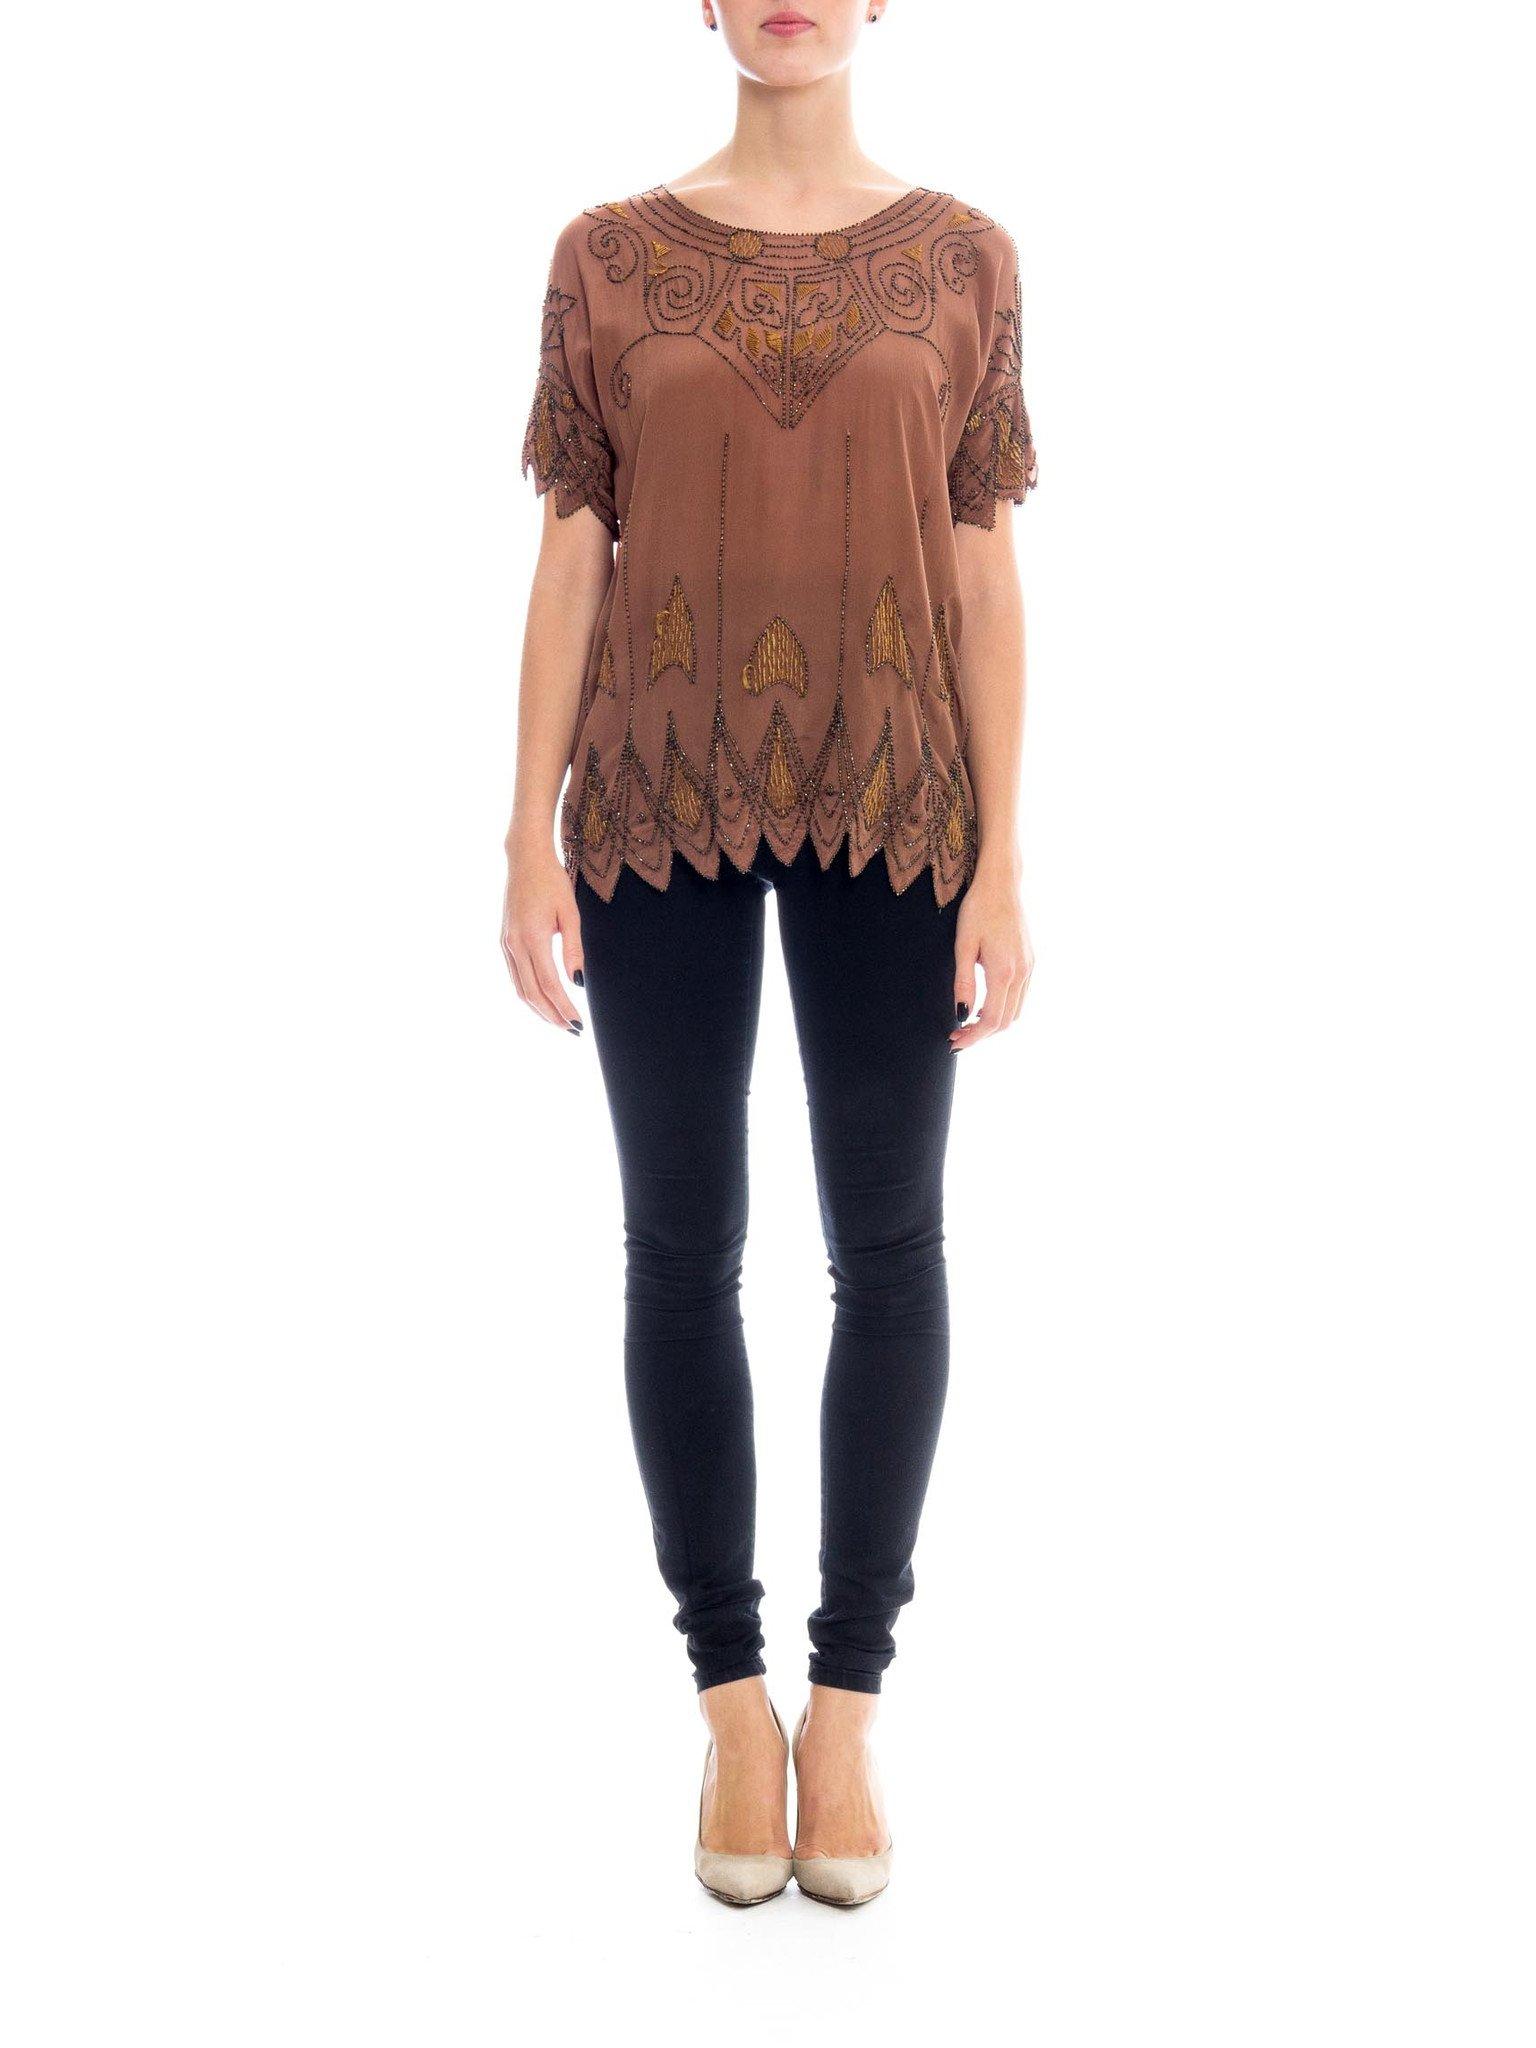 1920S Silk Crepe De Chine Deco Beaded & Embroidered Top For Sale 1